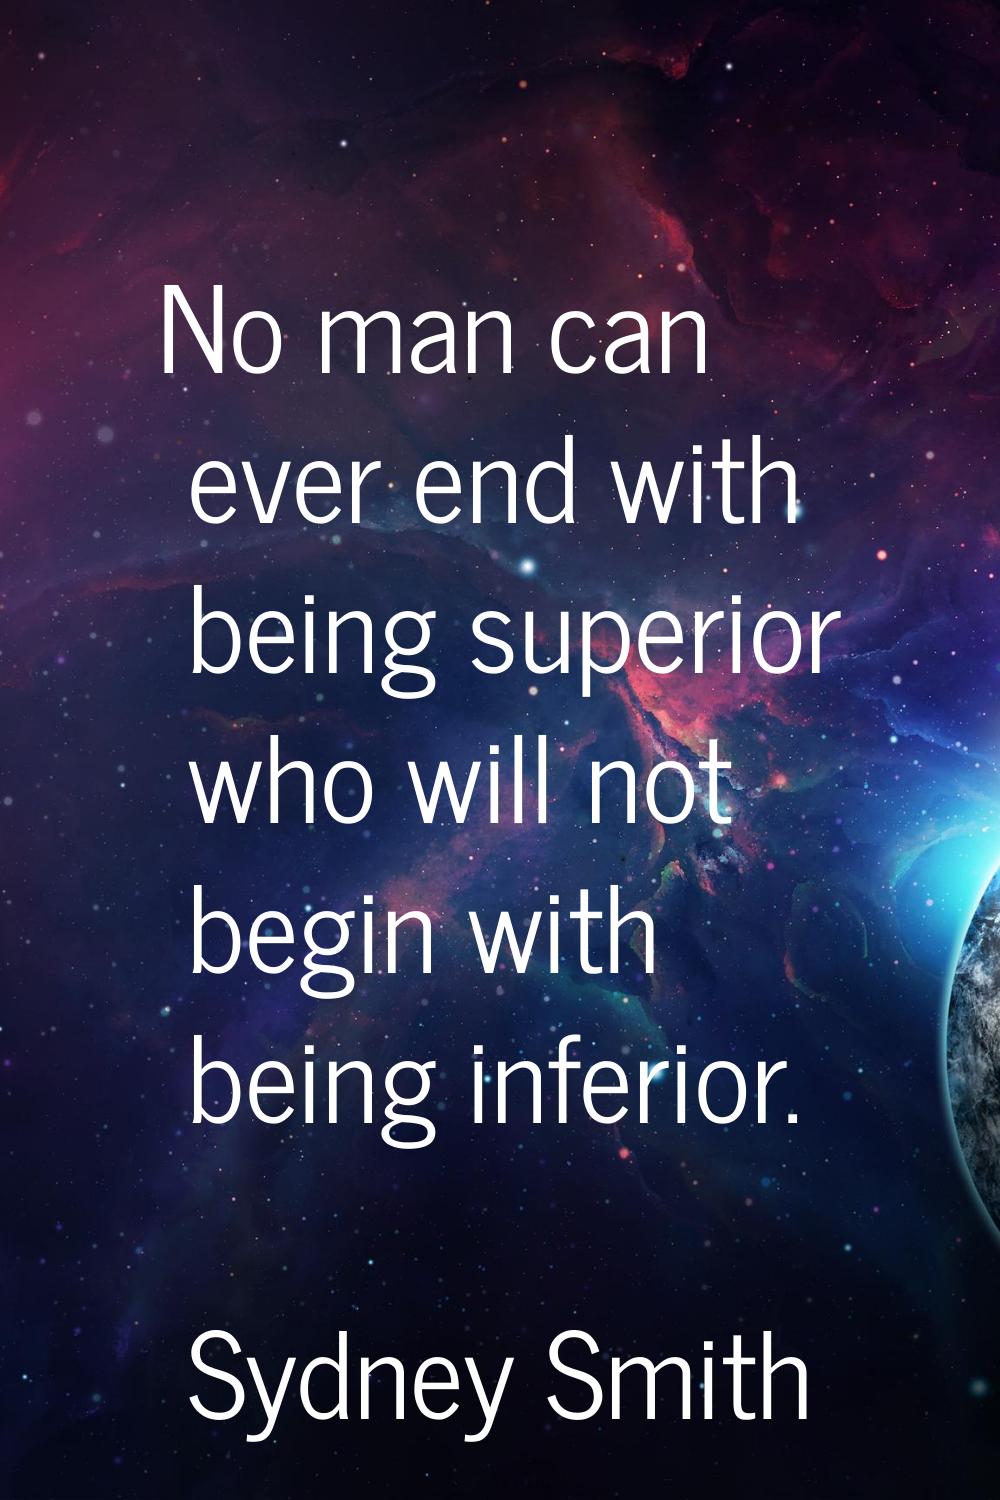 No man can ever end with being superior who will not begin with being inferior.